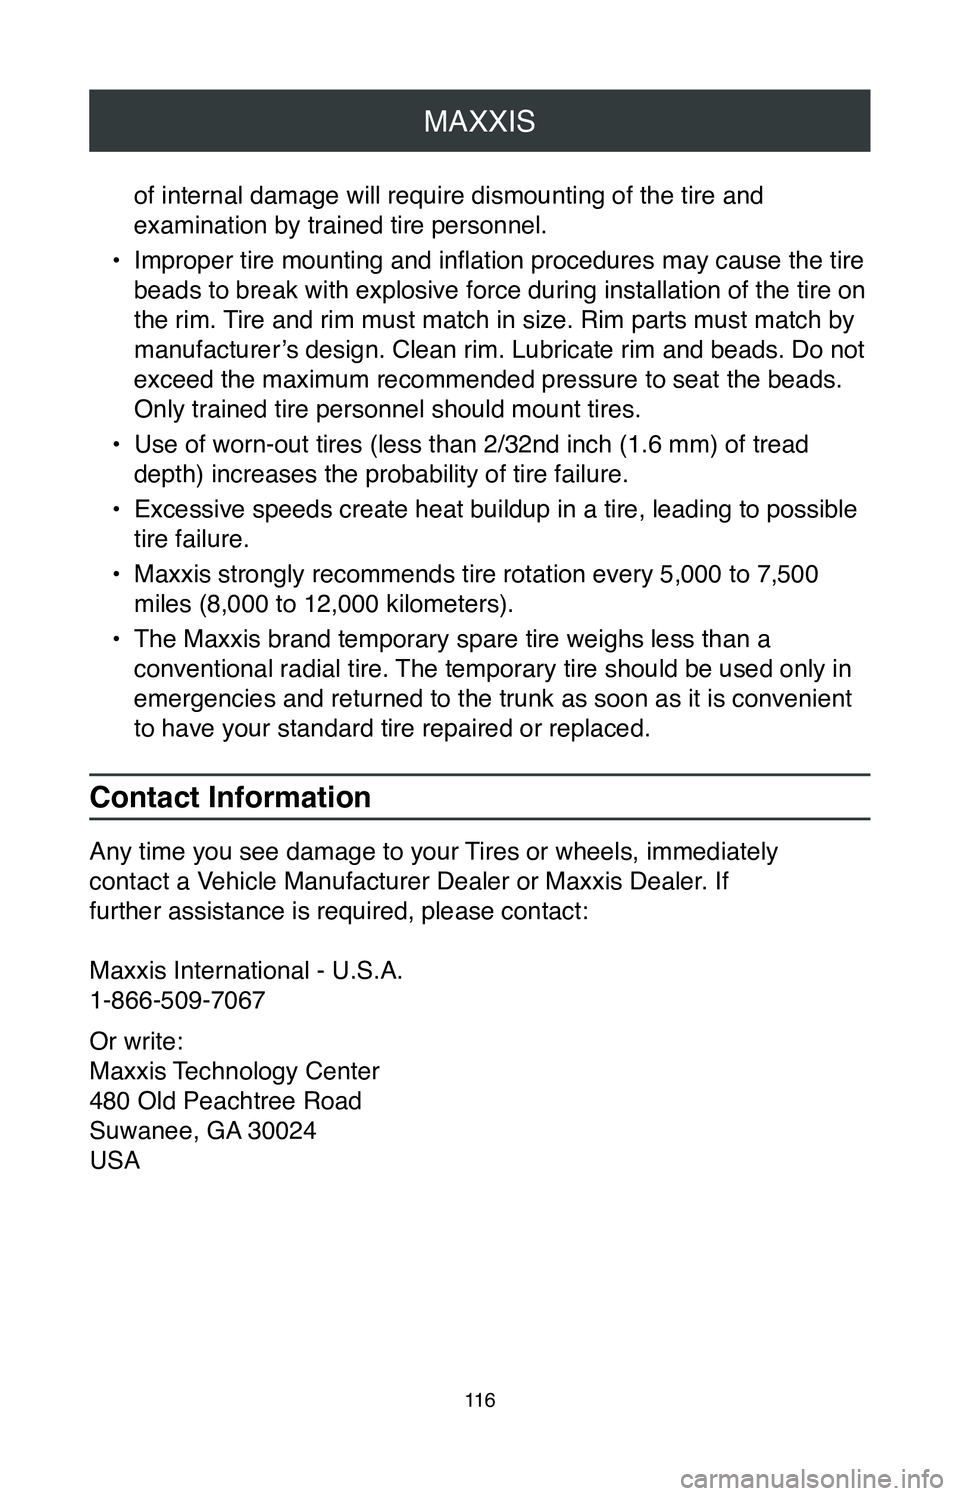 TOYOTA COROLLA HATCHBACK 2020  Warranties & Maintenance Guides (in English) MAXXIS
11 6
of internal damage will require dismounting of the tire and 
examination by trained tire personnel.
•
 Improper tire mounting and inflation procedures may cause the tire 
beads to break 